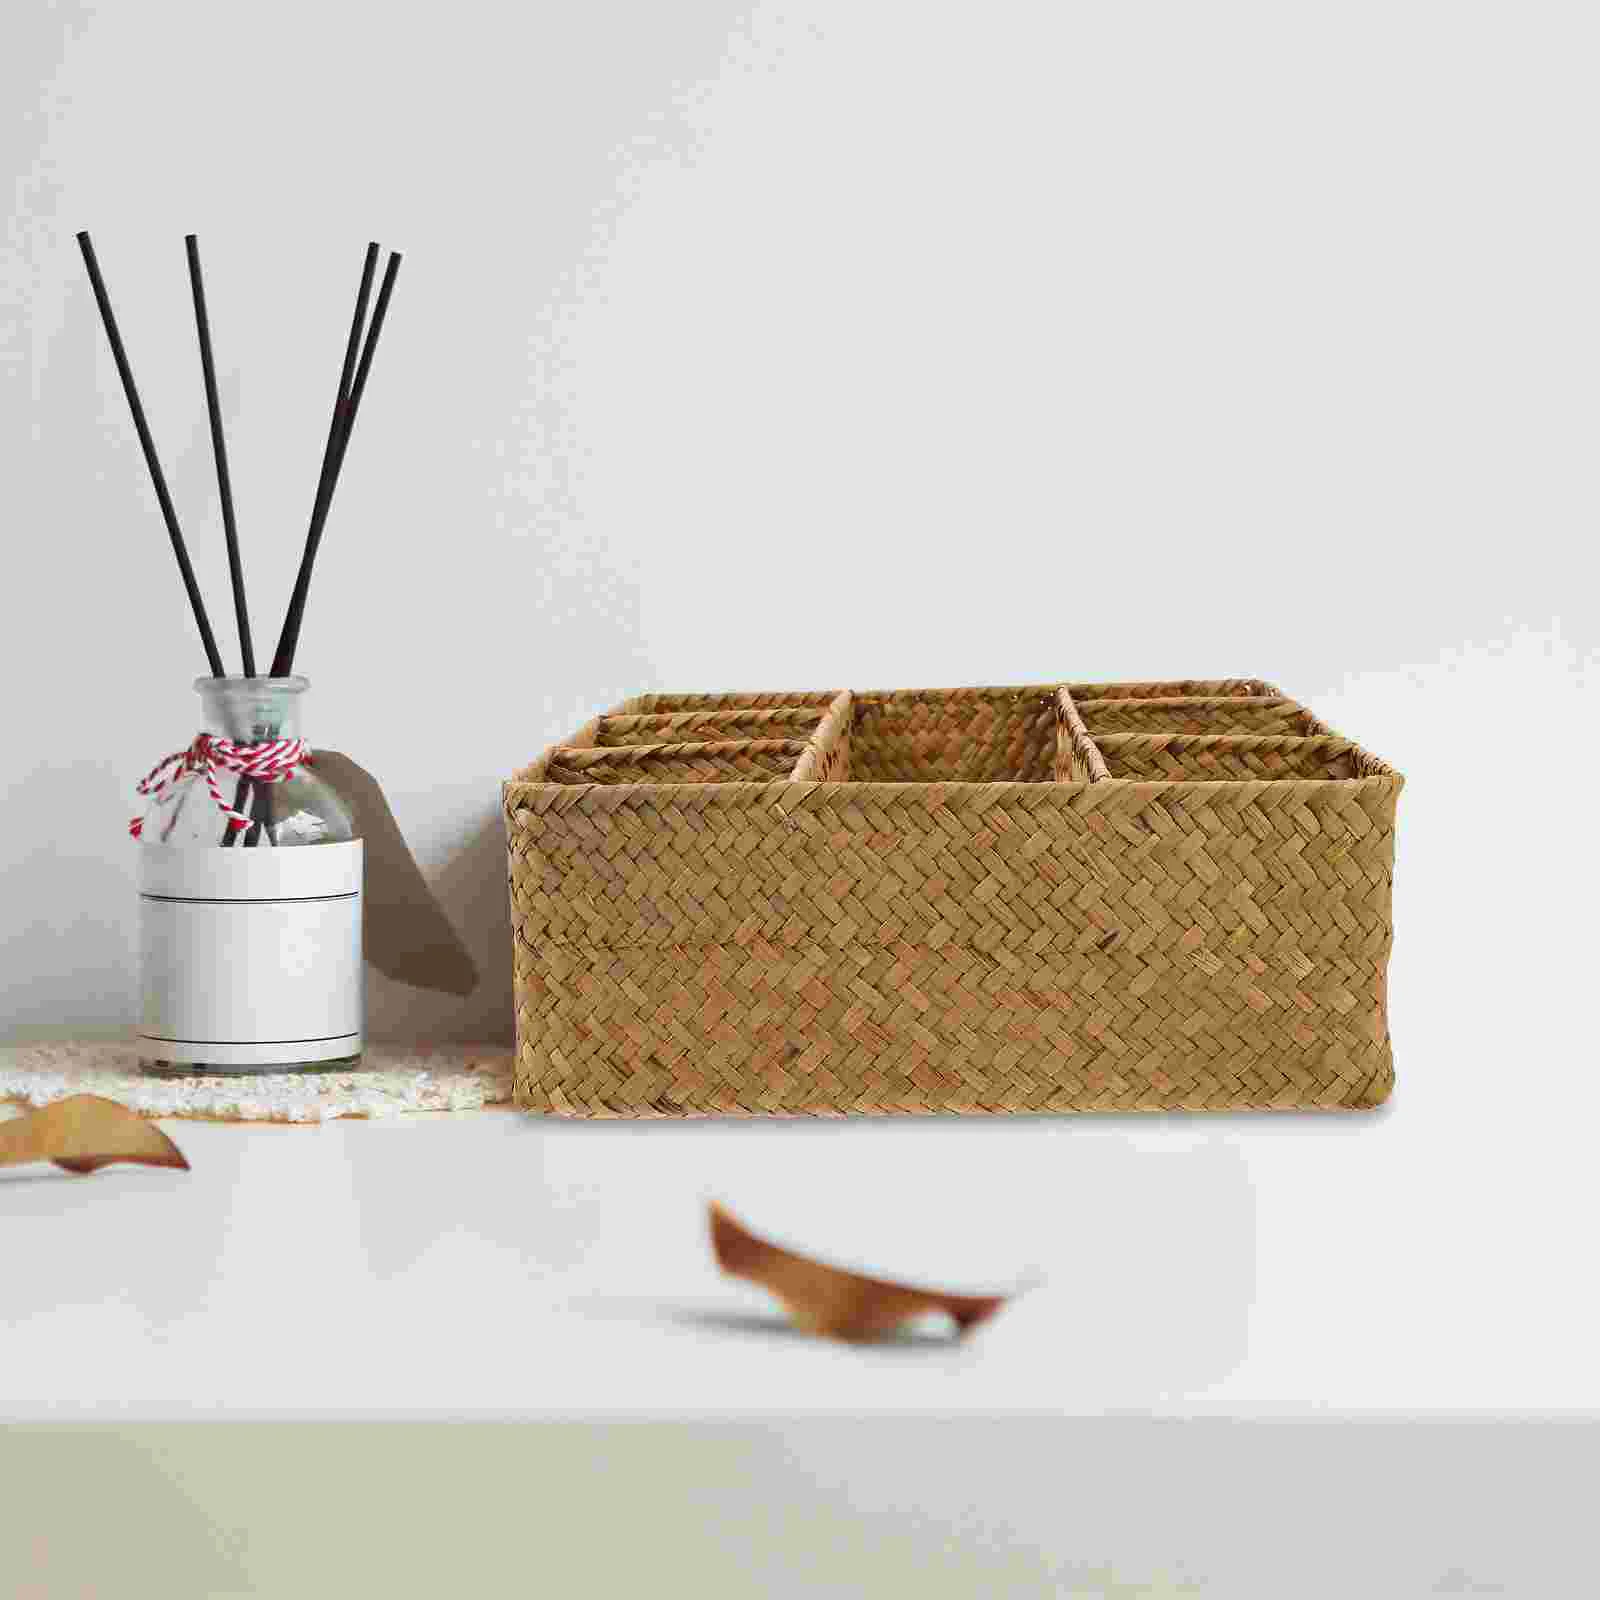 

Basket For Storage Straw Home Rustic Style Woven Willow Multi-use Baskets Organizing